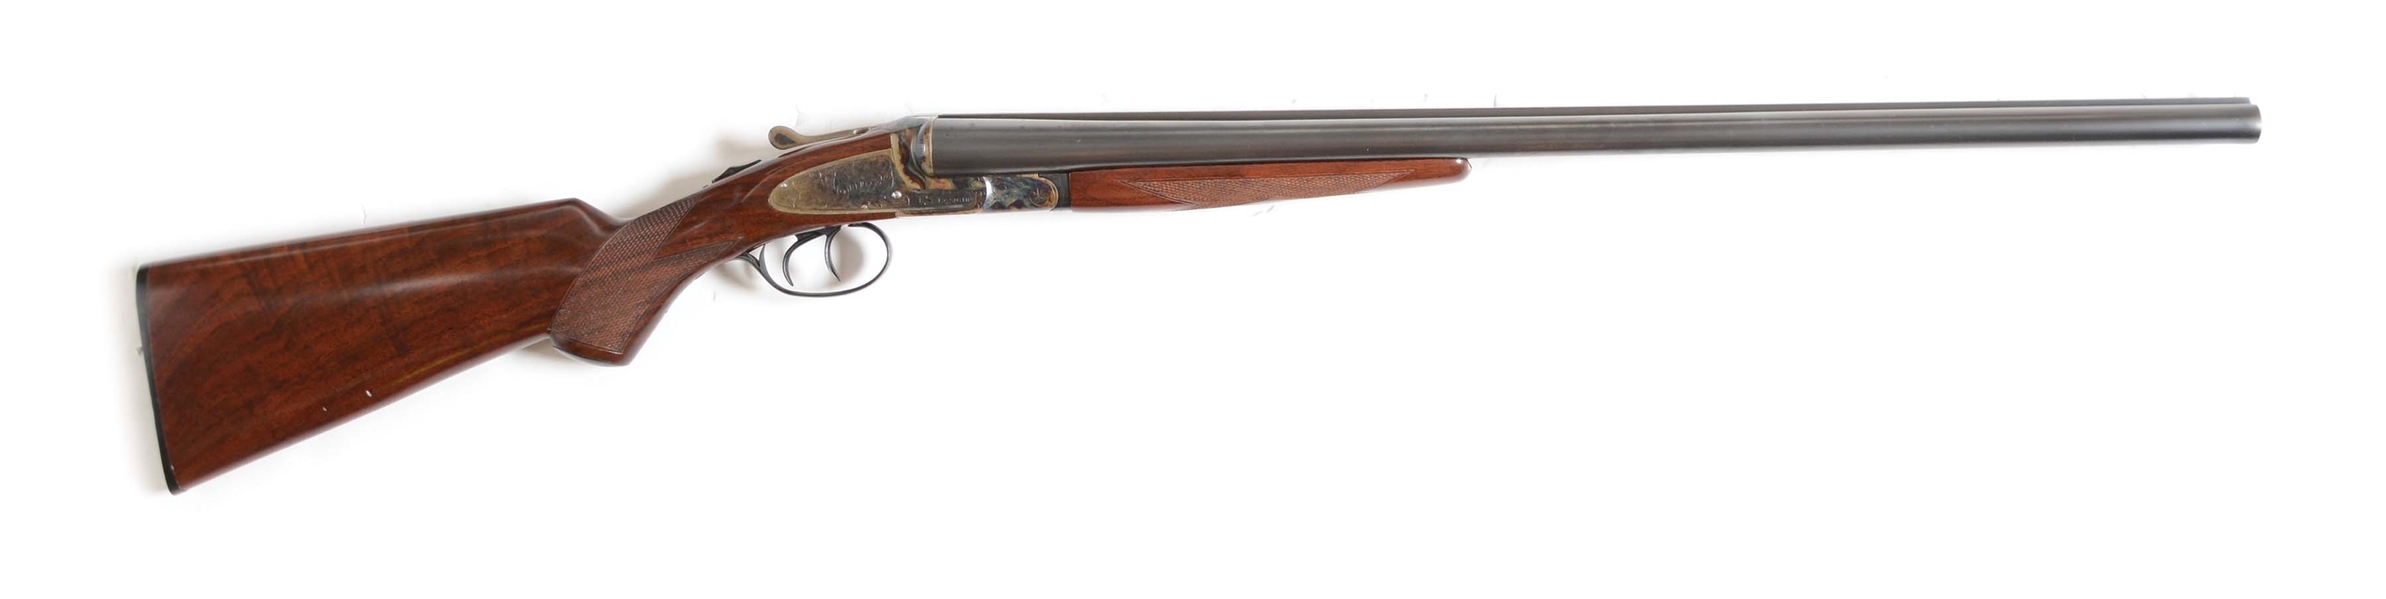 (C) NICELY REFURBISHED L. C. SMITH IDEAL GRADE 12 BORE SIDE BY SIDE SHOTGUN.